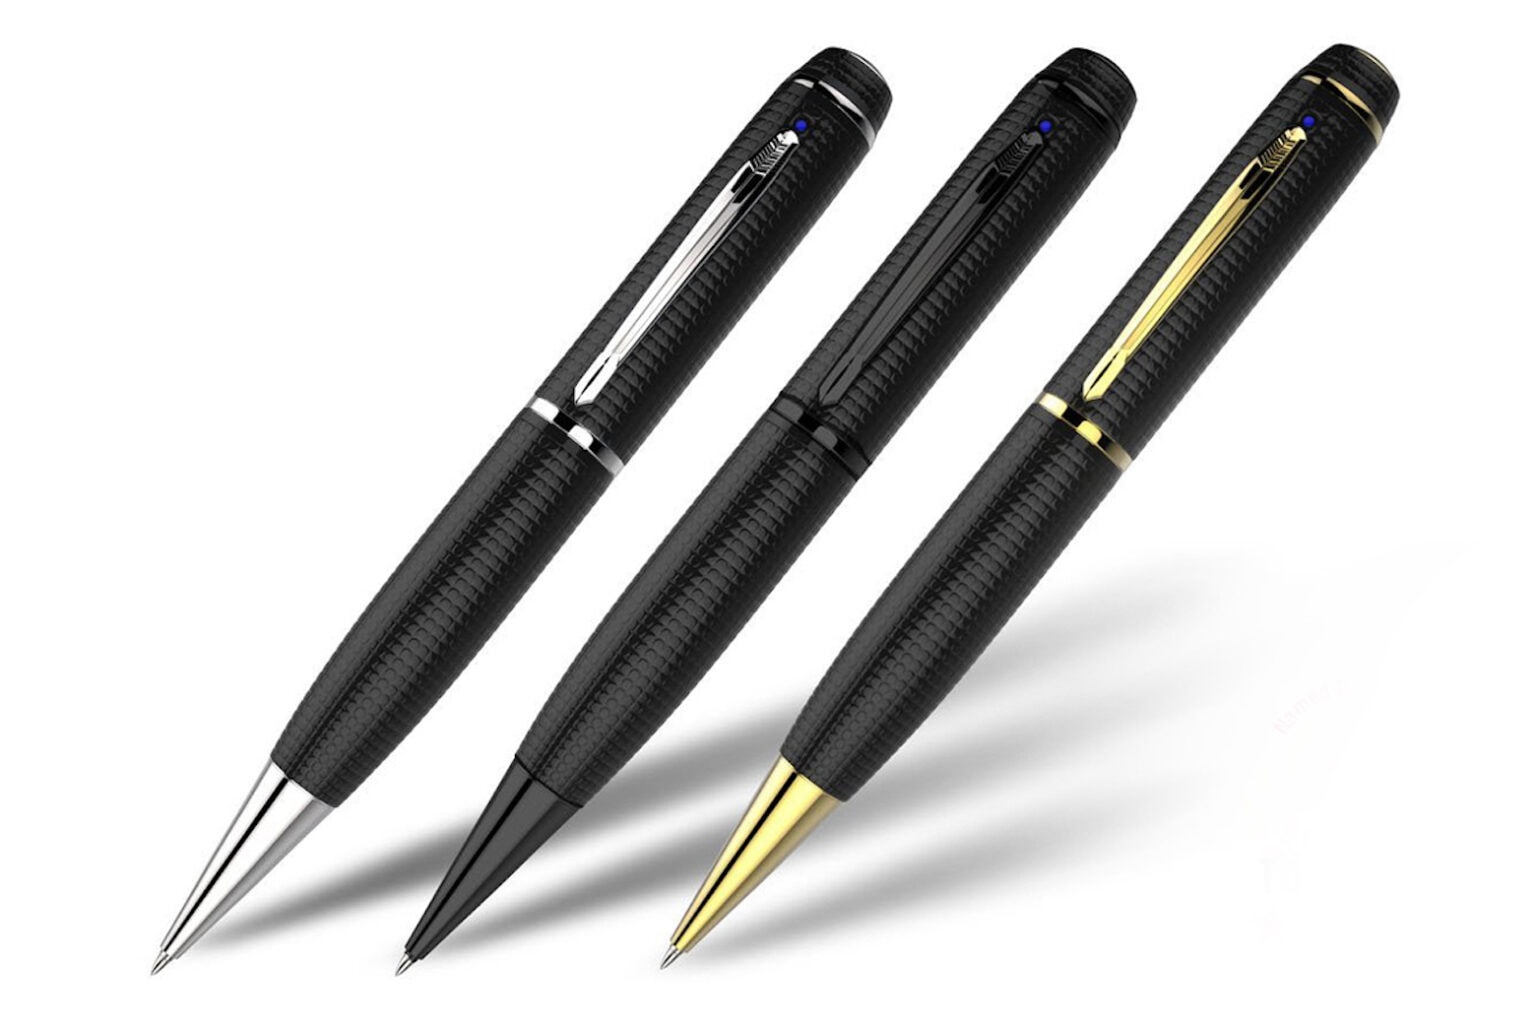 This spy pen is the write way to do covert recording.